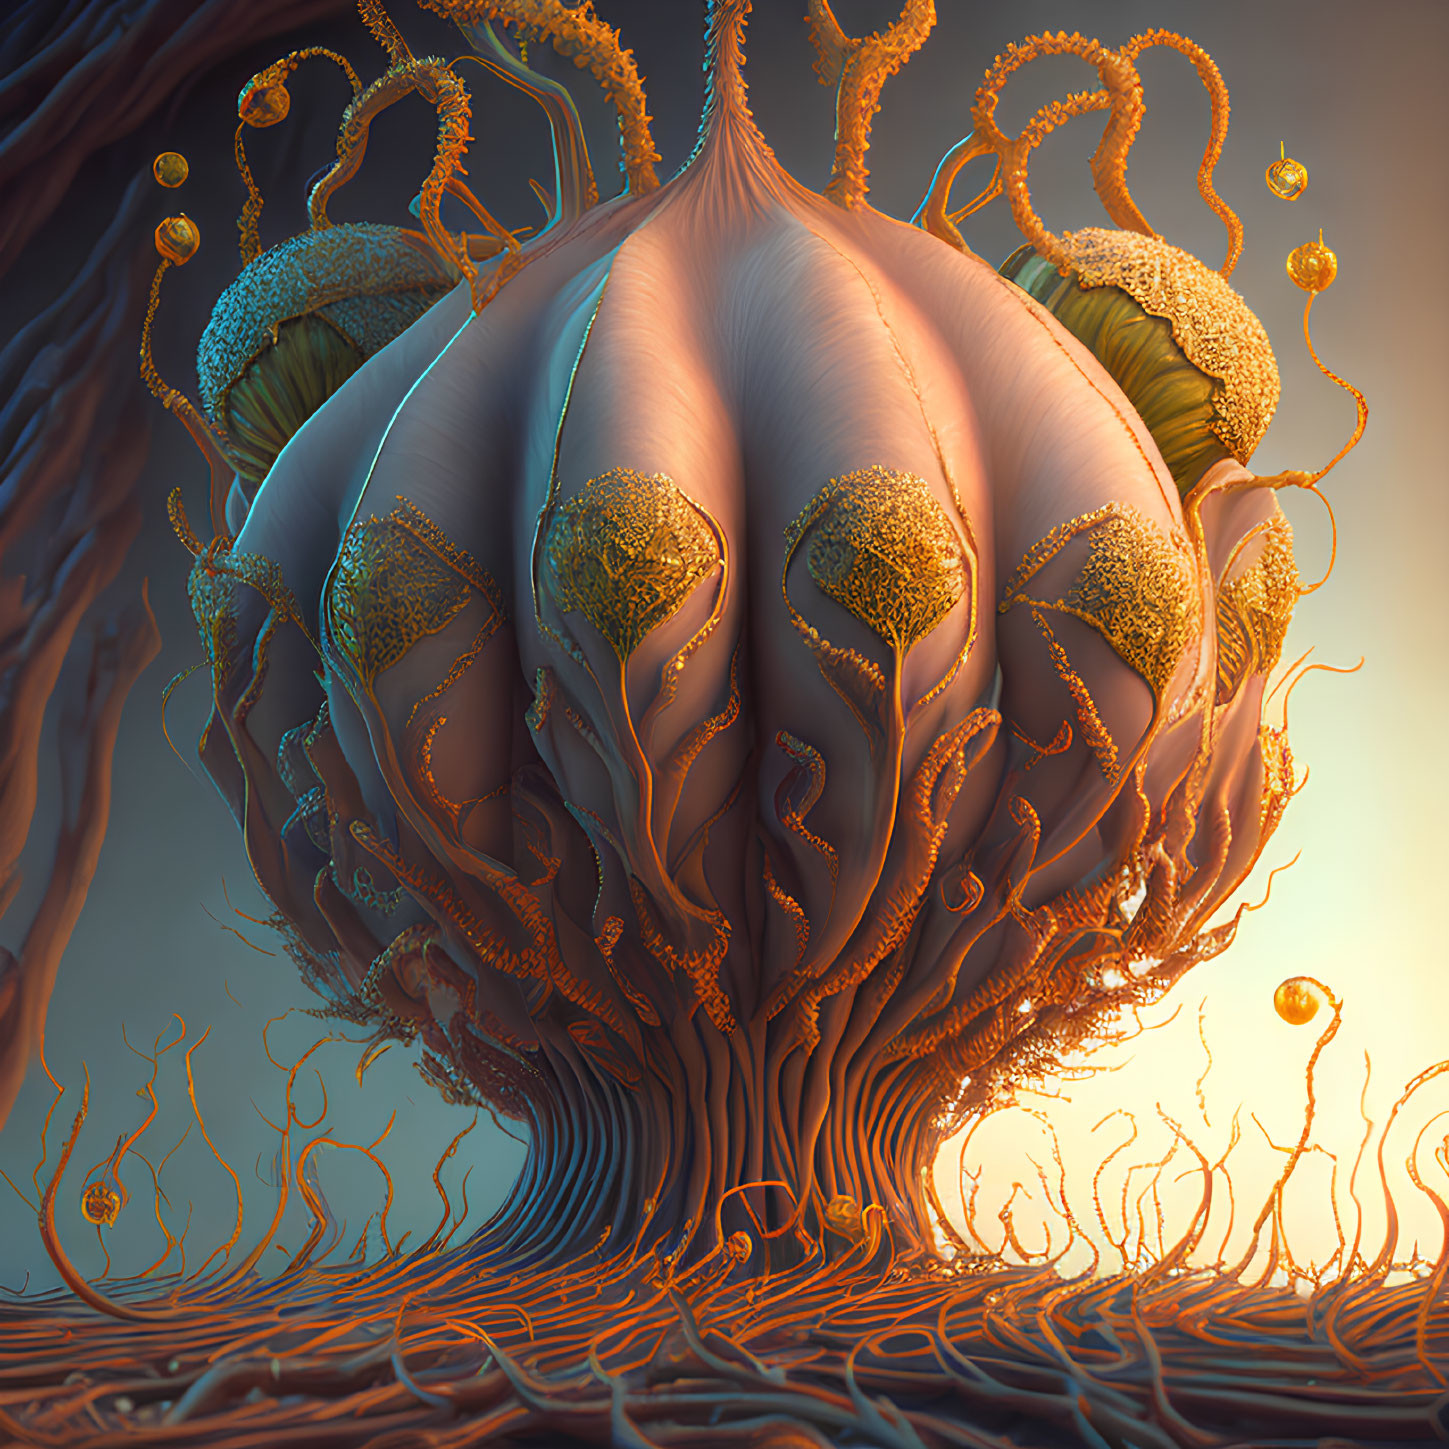 Surrealistic bloom with tentacle-like roots and golden-hued fringes in warm sepia